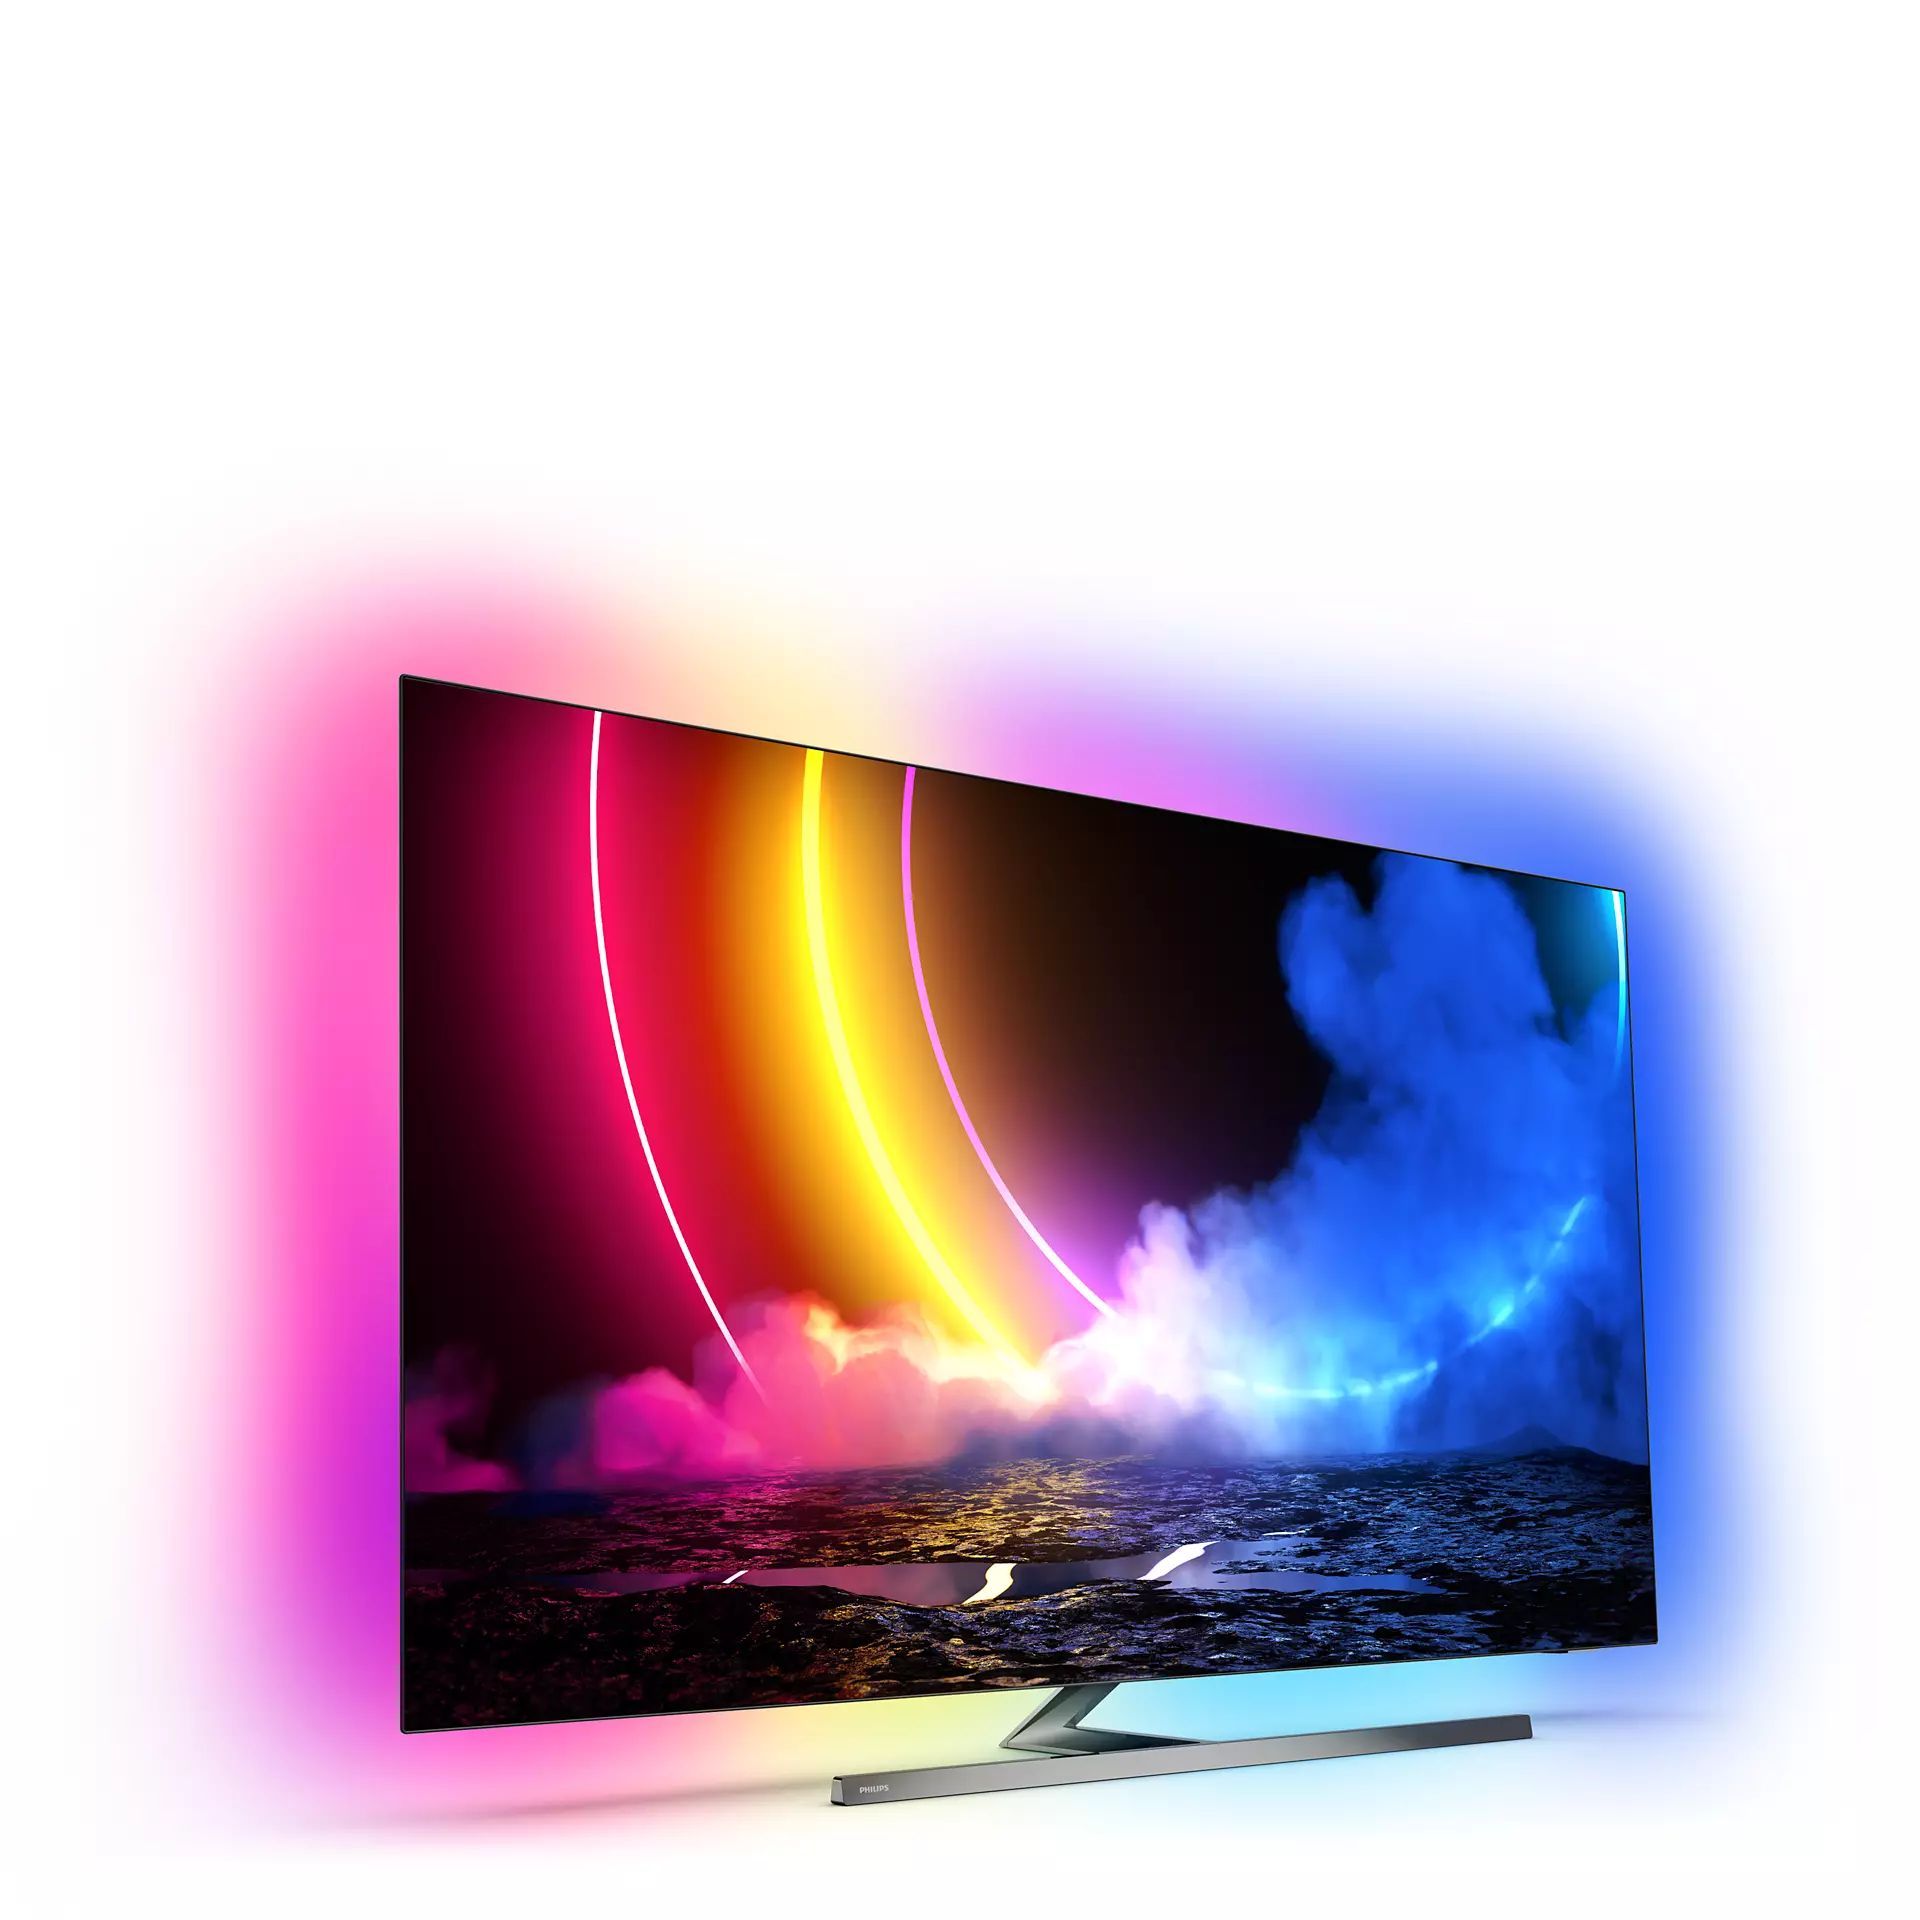 Phillips OLED 4K UHD OLED Android TV 55OLED856/12 - Ambilight. - BW. RRP £1,490.00. The - Image 2 of 2